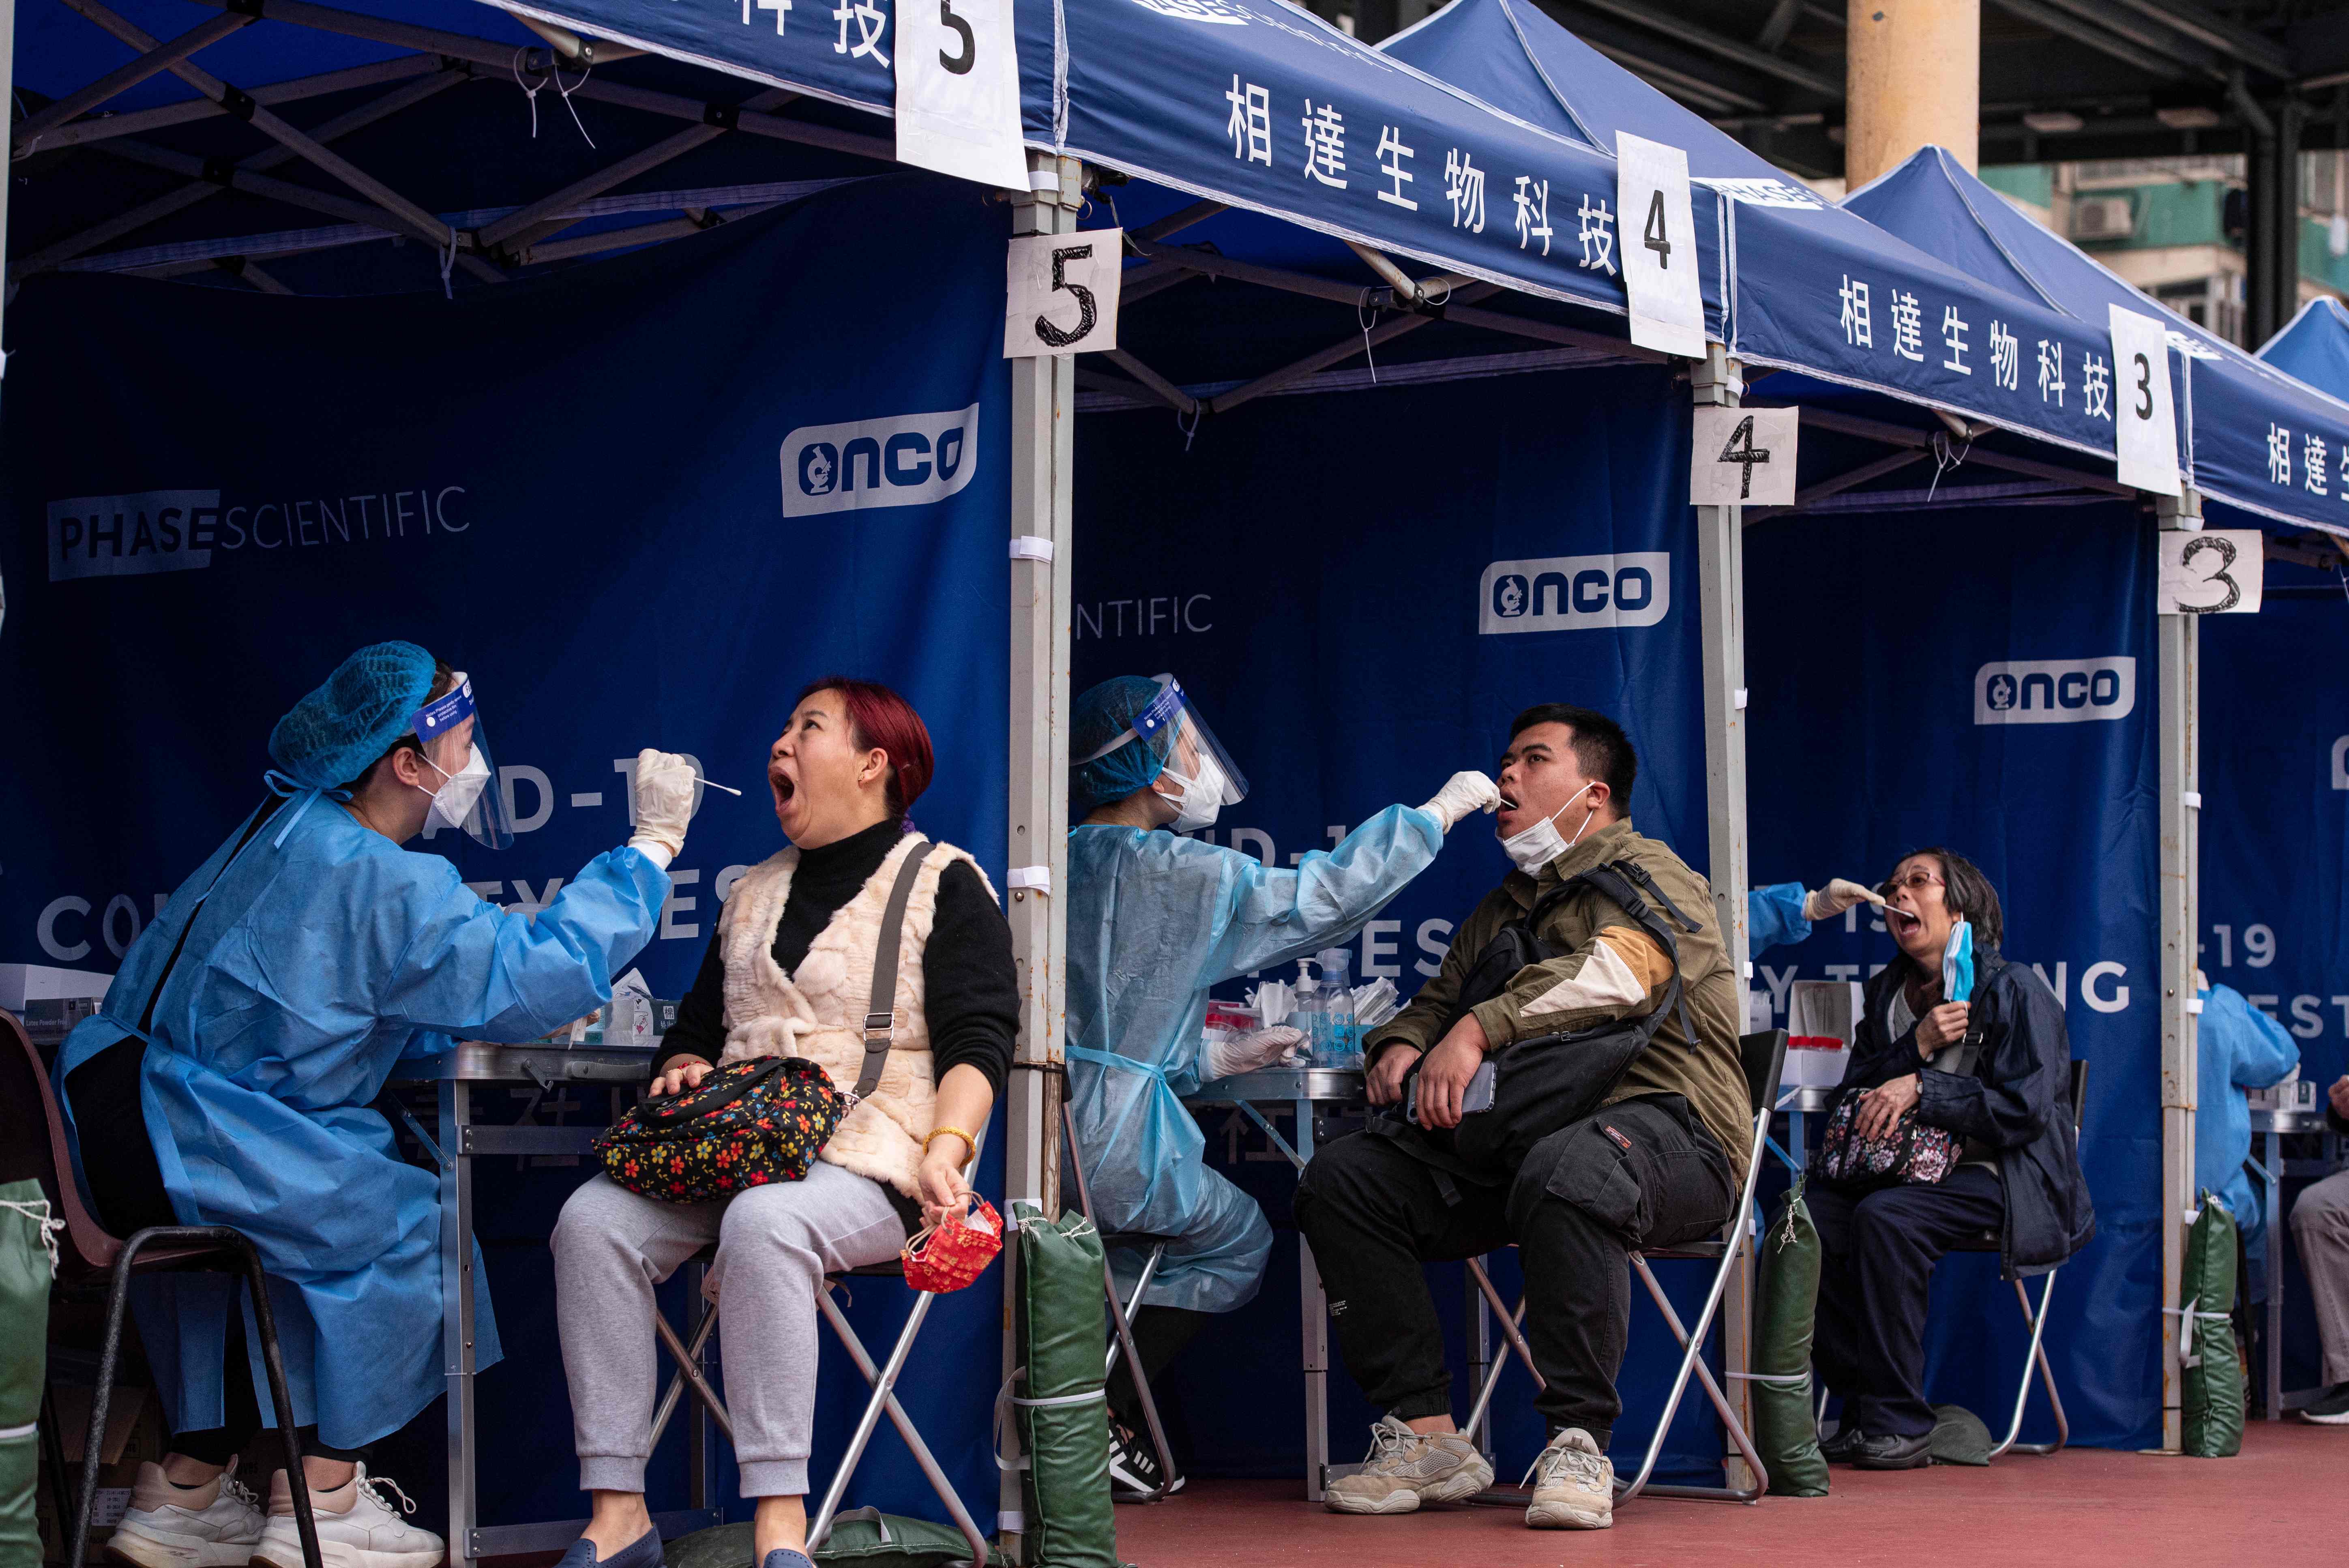 People are tested at a temporary testing site for Covid-19 in Hong Kong on February 12, 2022